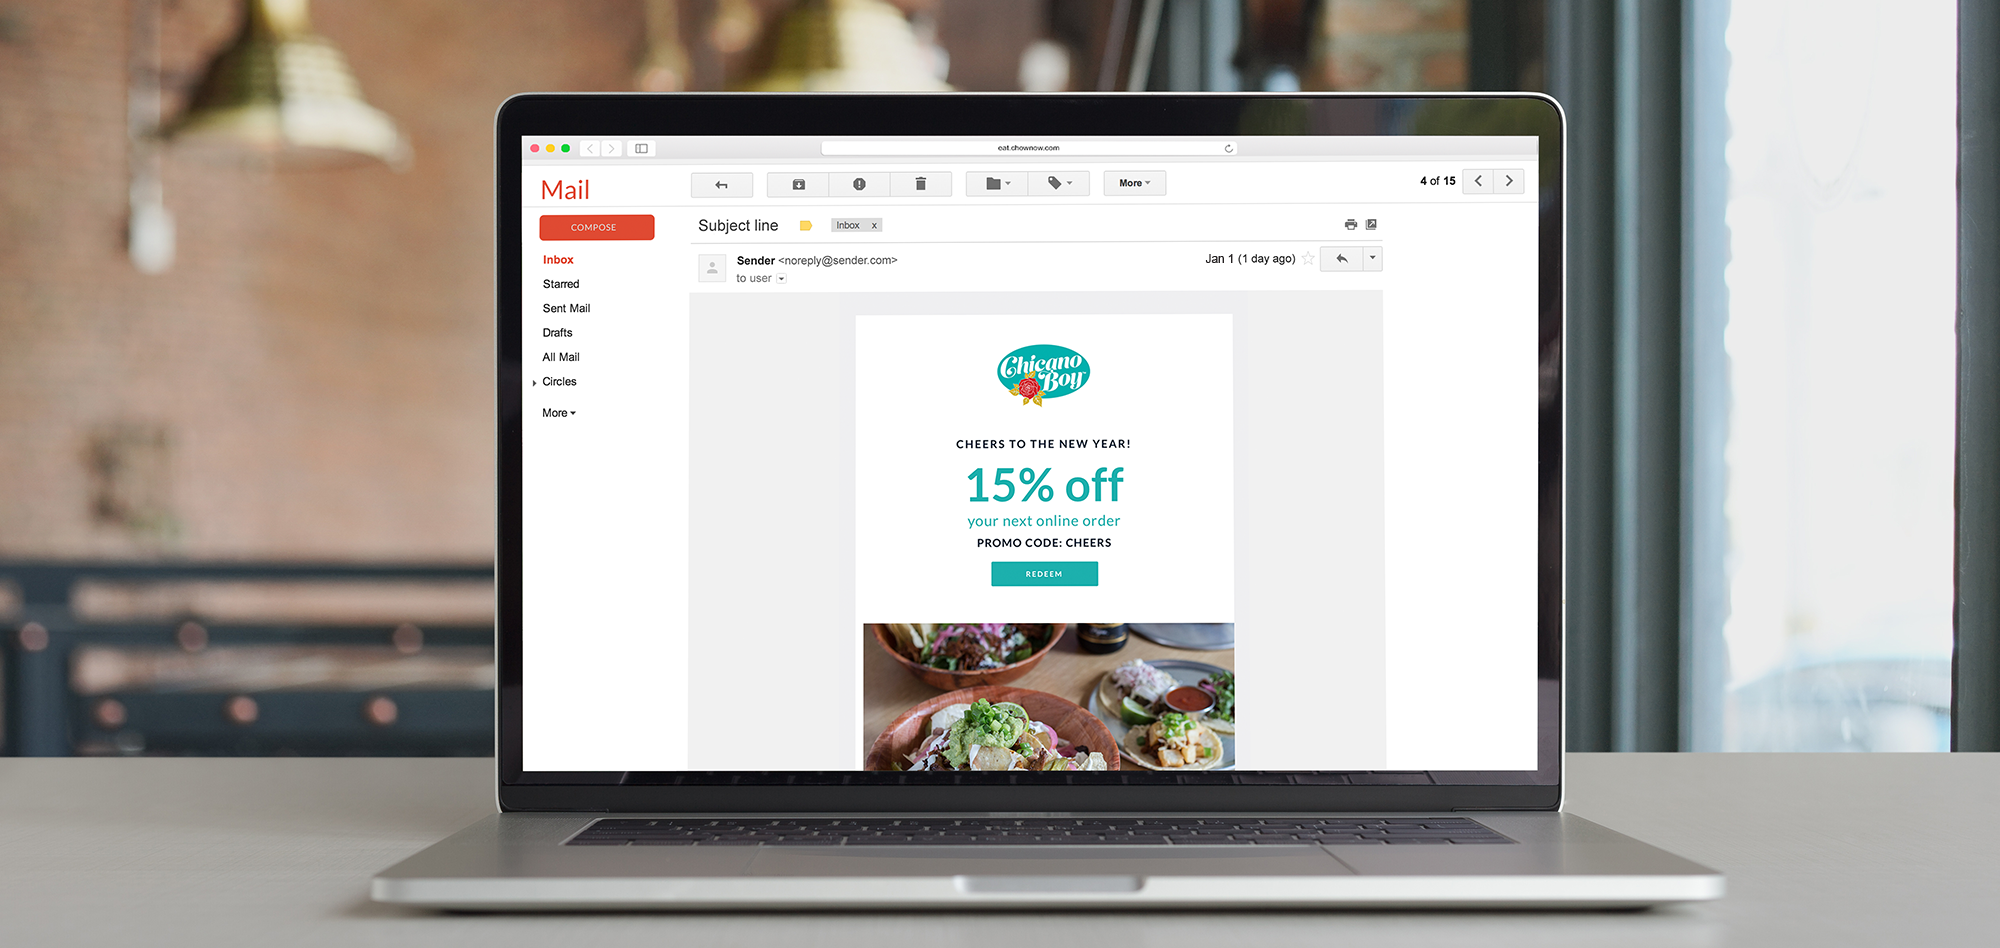 Example of a promotional email from a restaurant offering a small discount on online orders.